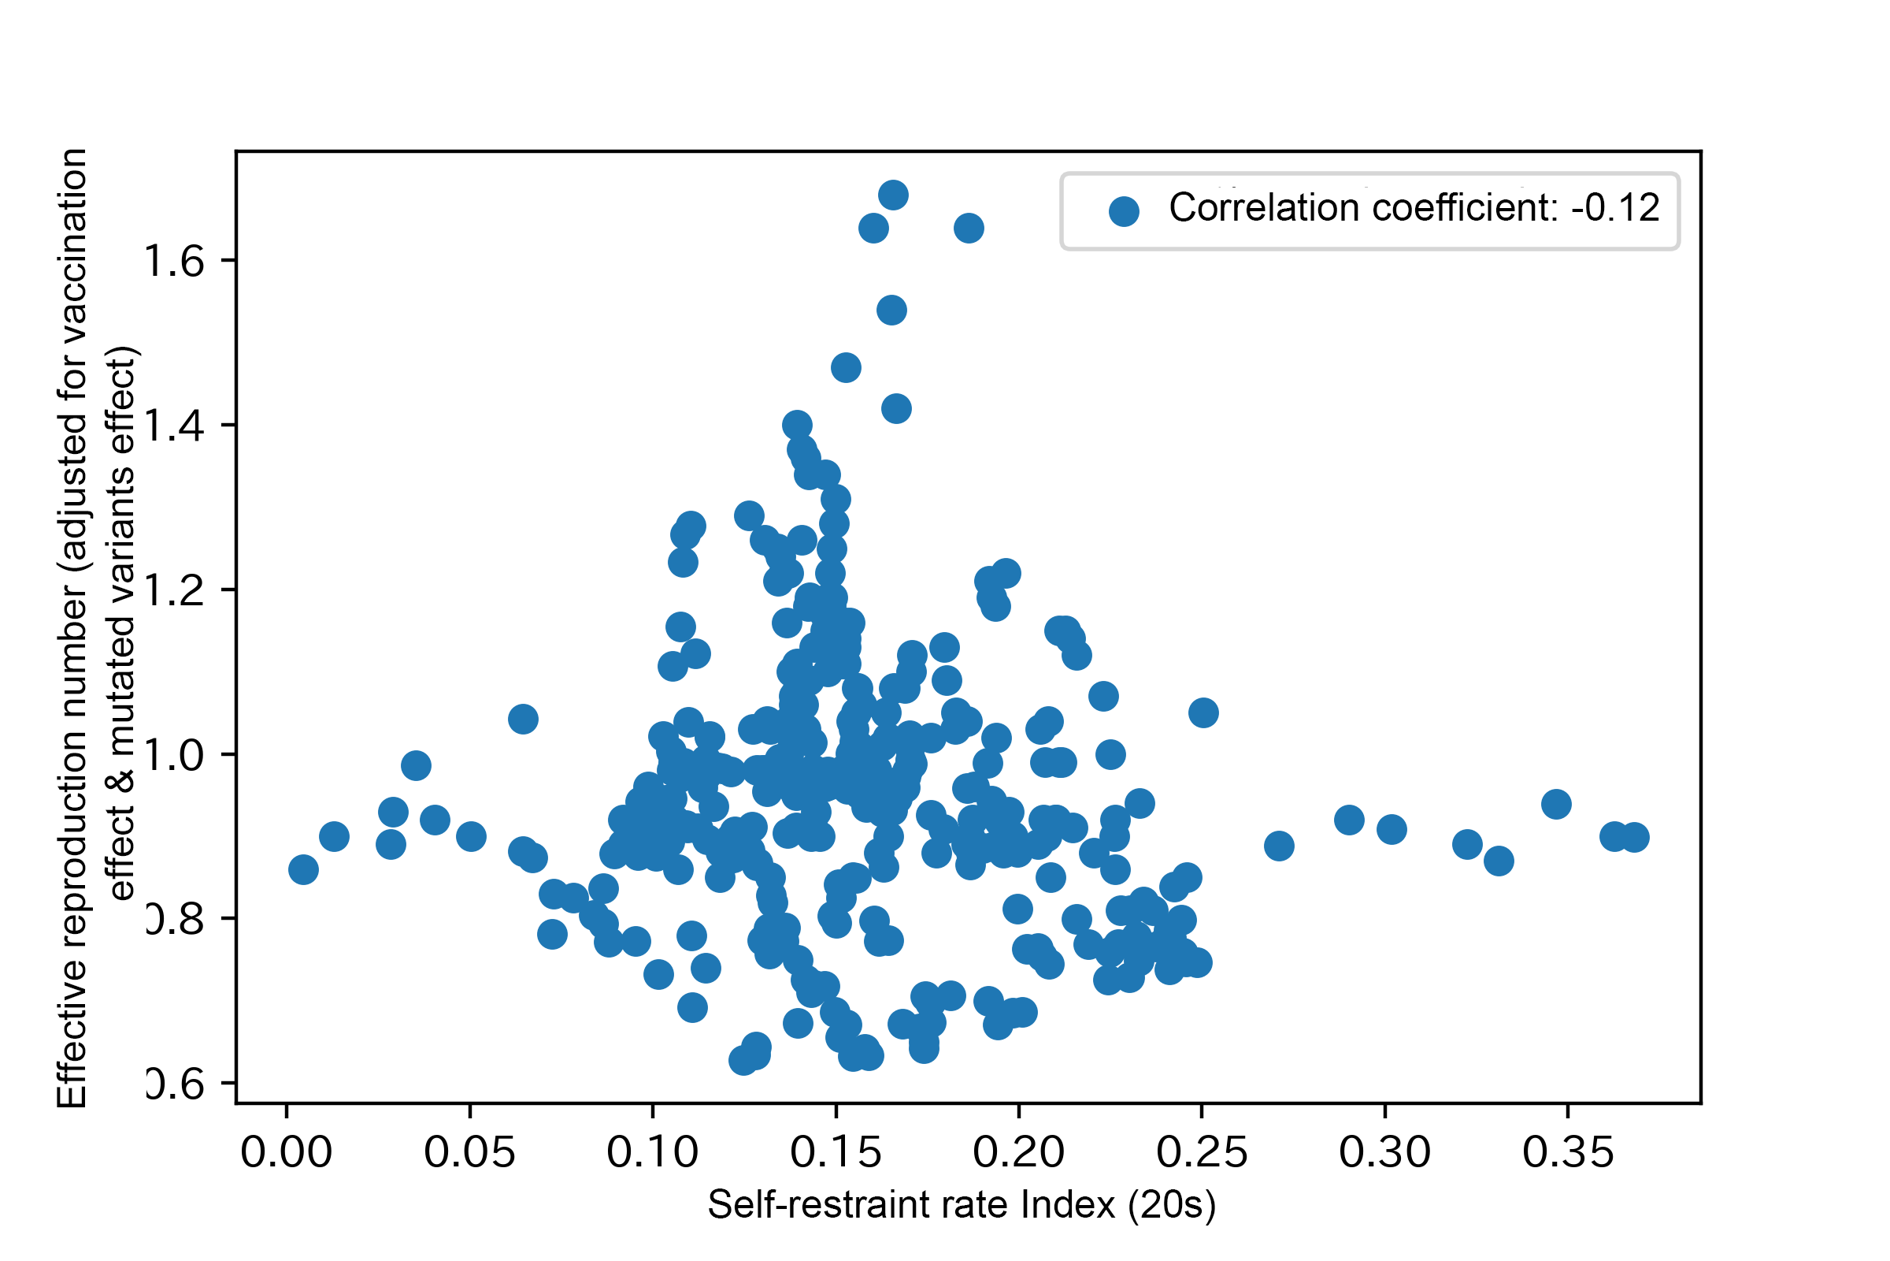 Example of data with low correlation